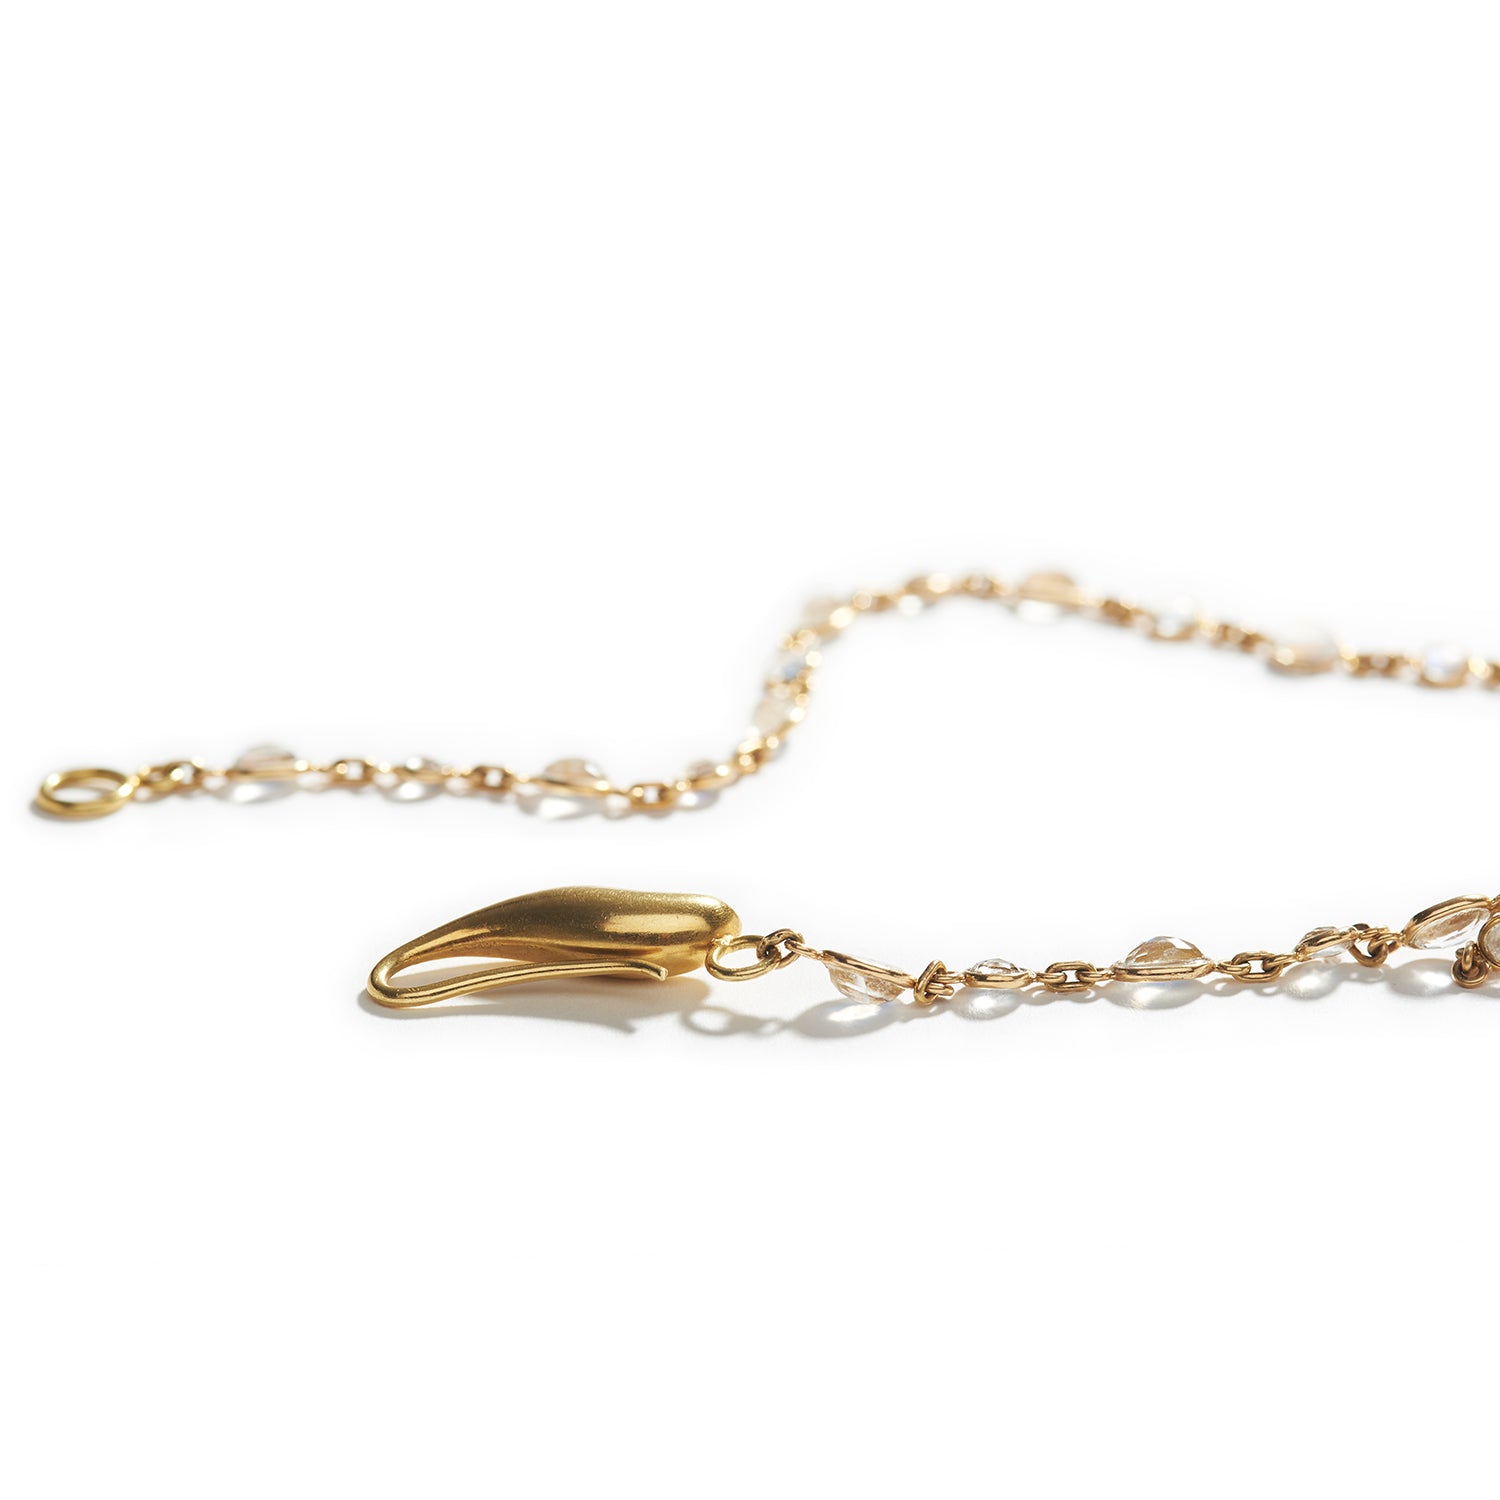 Moonstone & Gold Chain Necklace